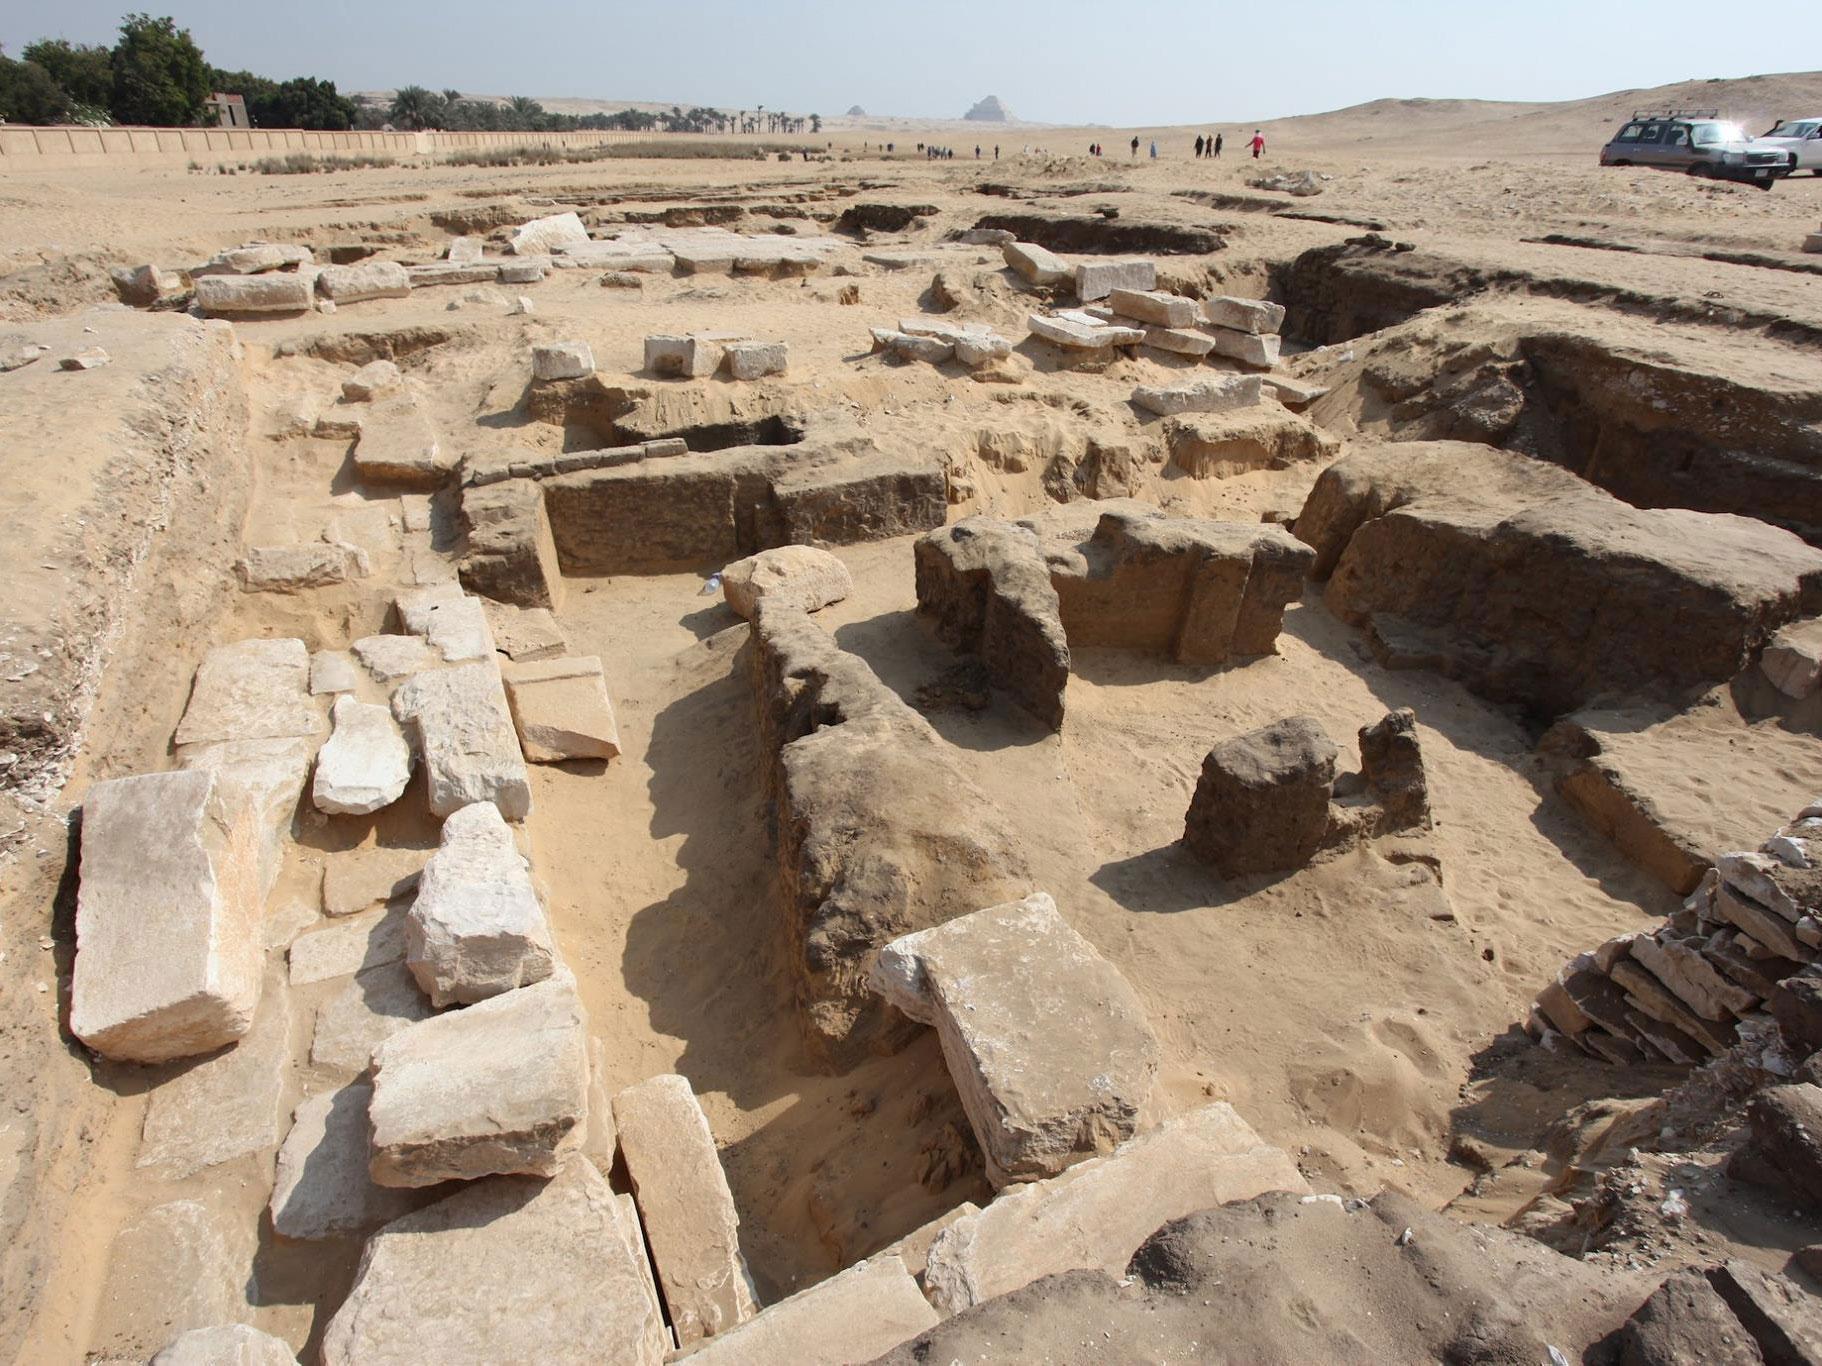 The remains of the Ramses II temple